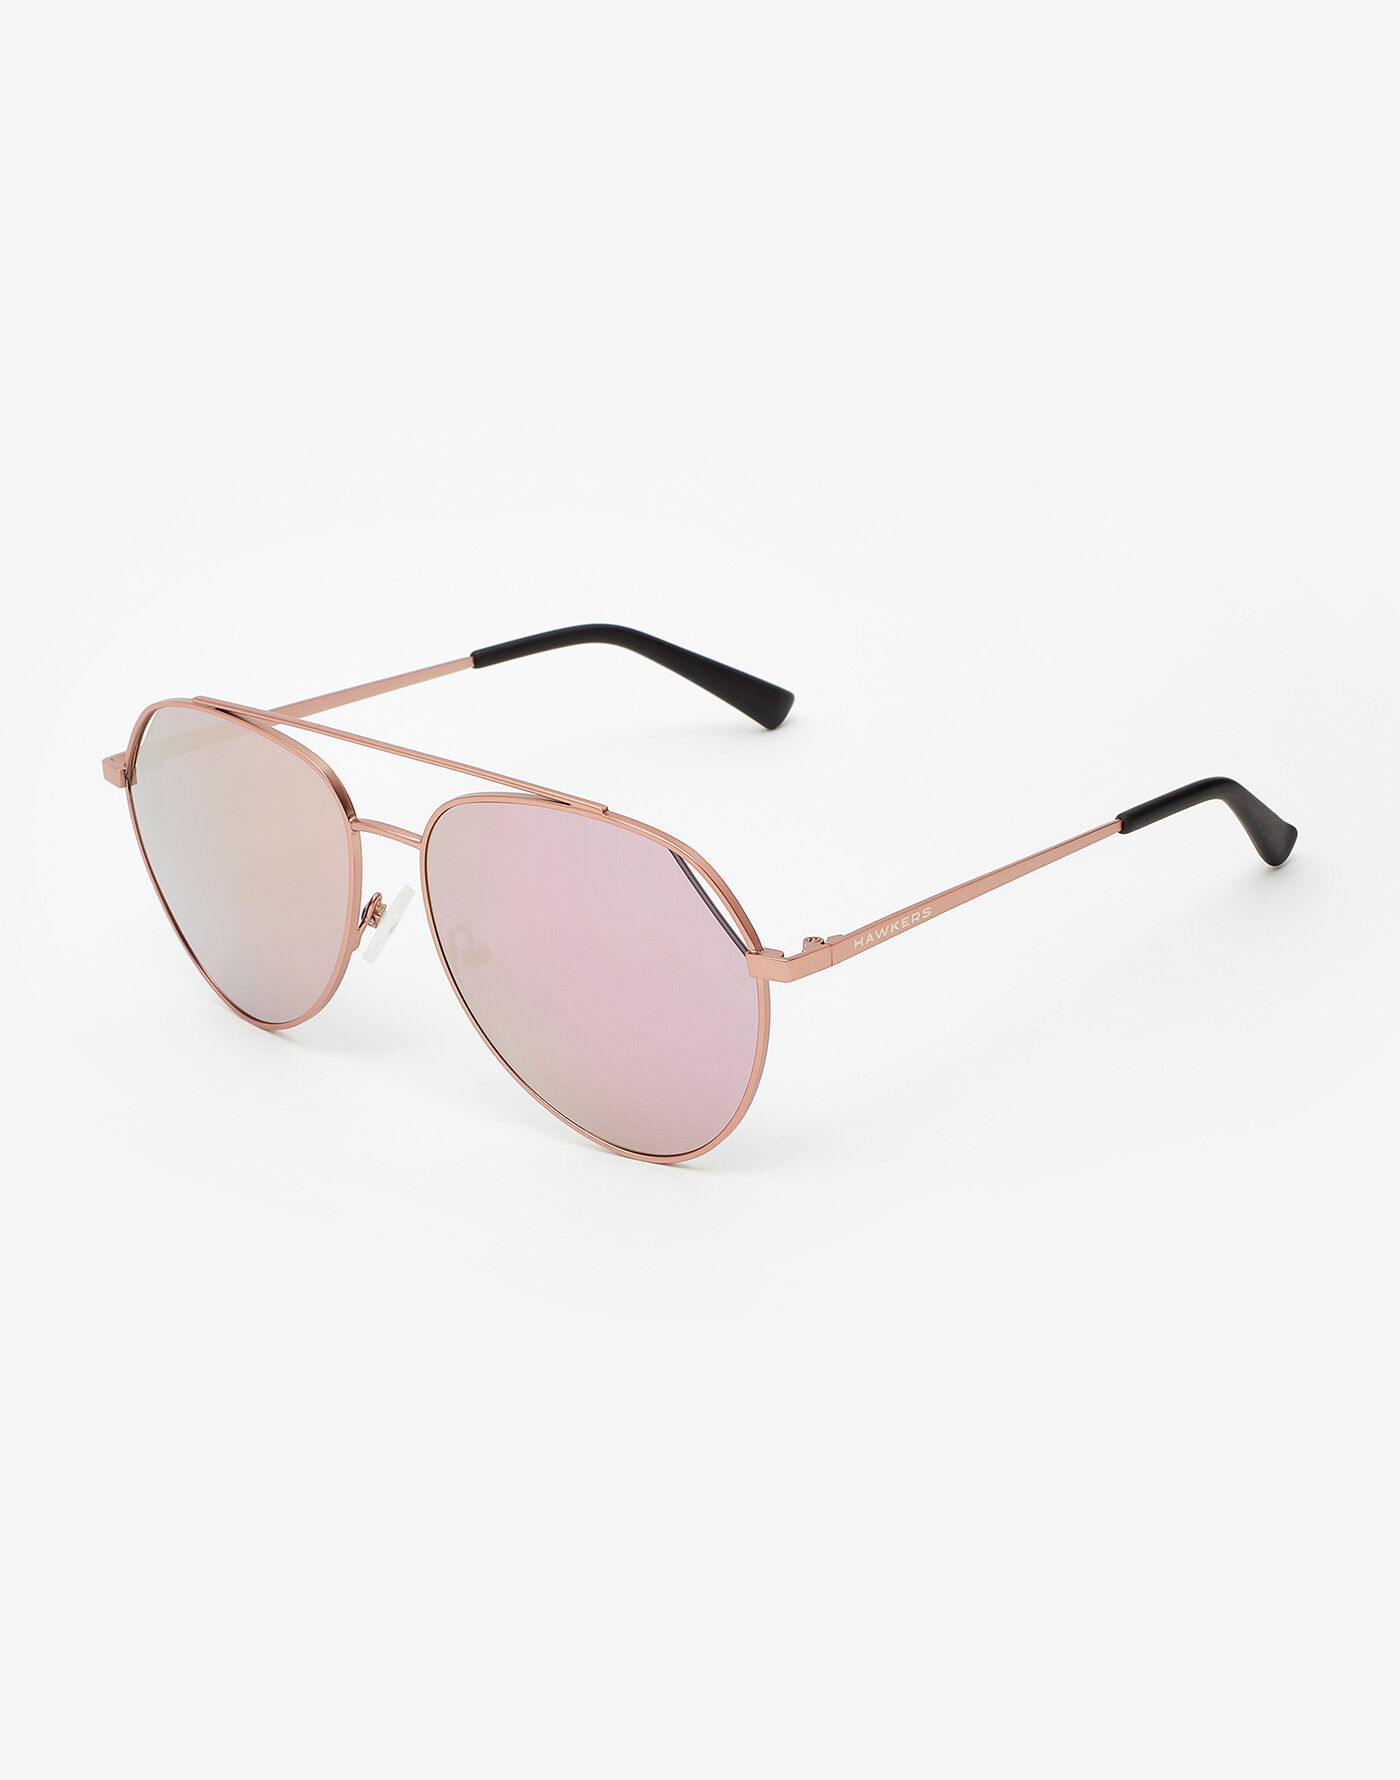 Buy Man Pink Sunglasses Online | Hawkers USA® Official Store